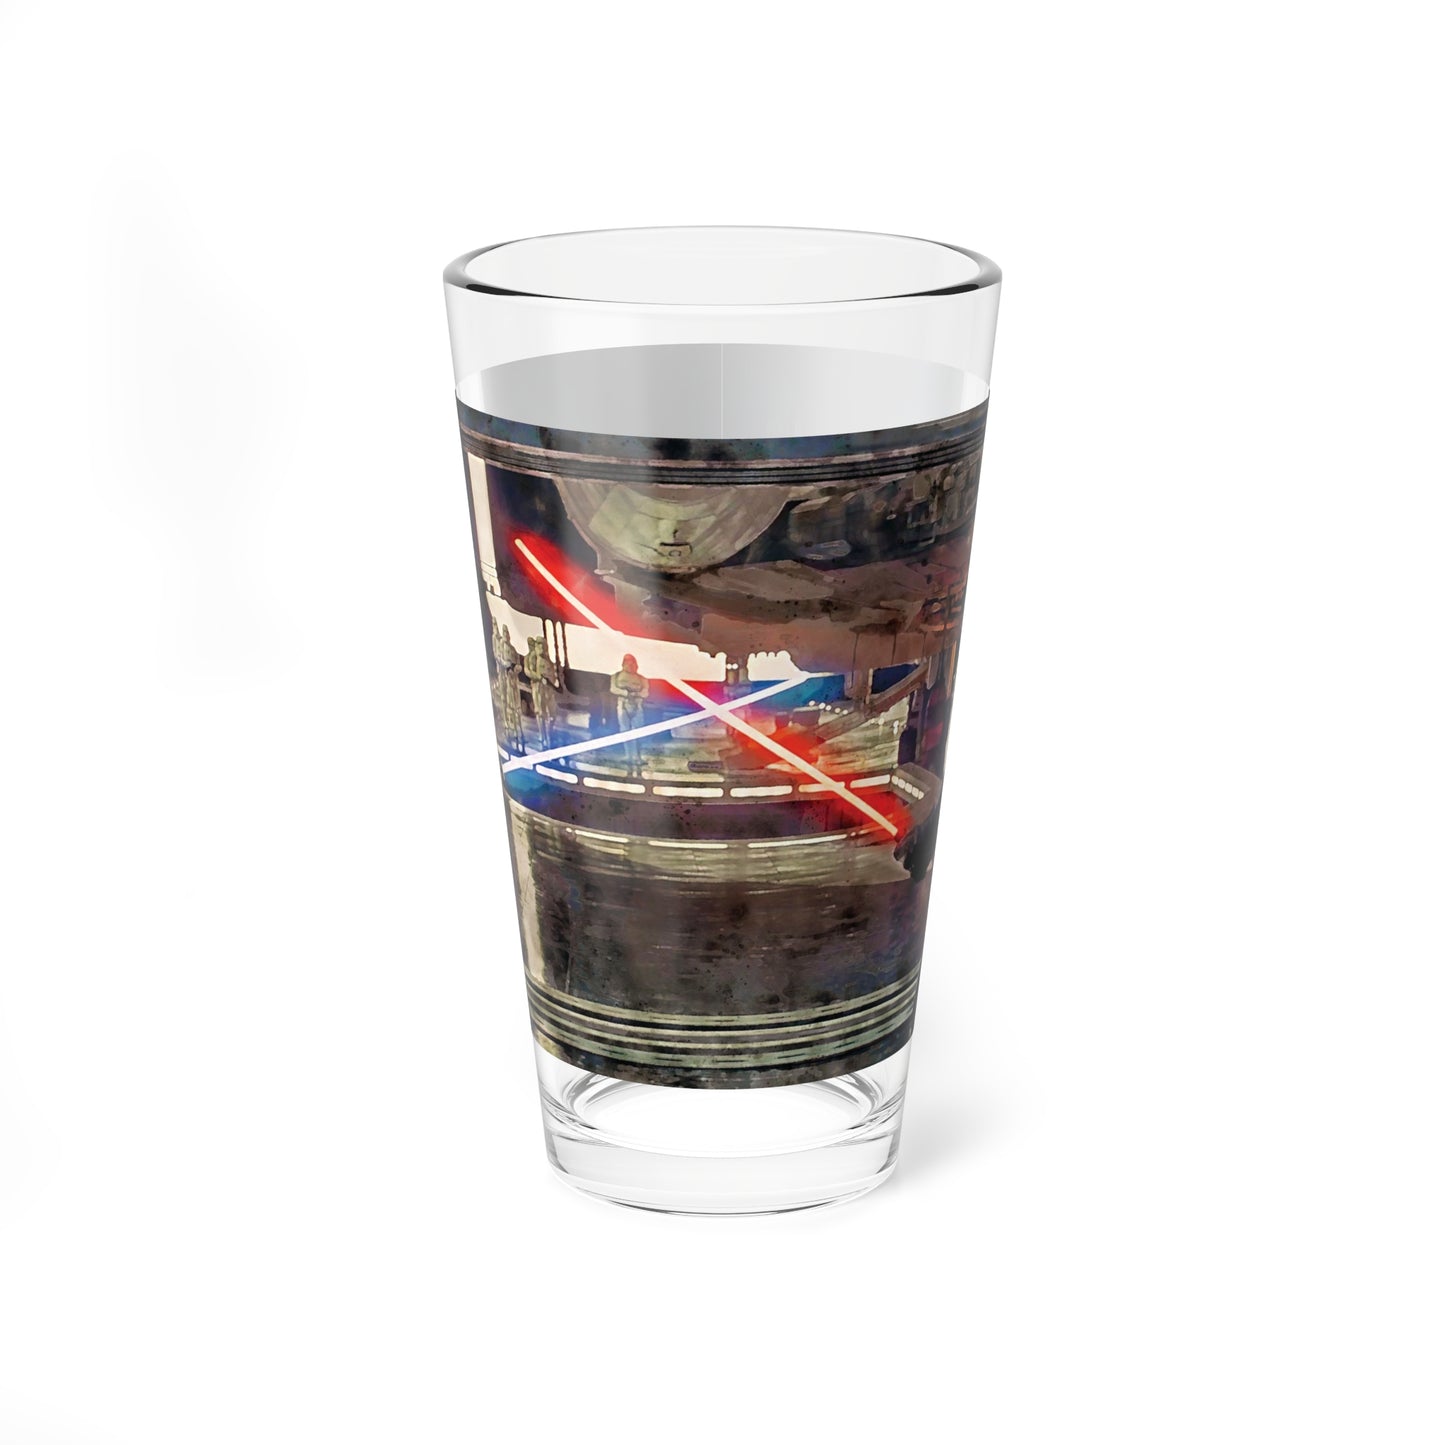 Circle is Now Complete - Star Wars Inspired Pint Glass - Drop #013